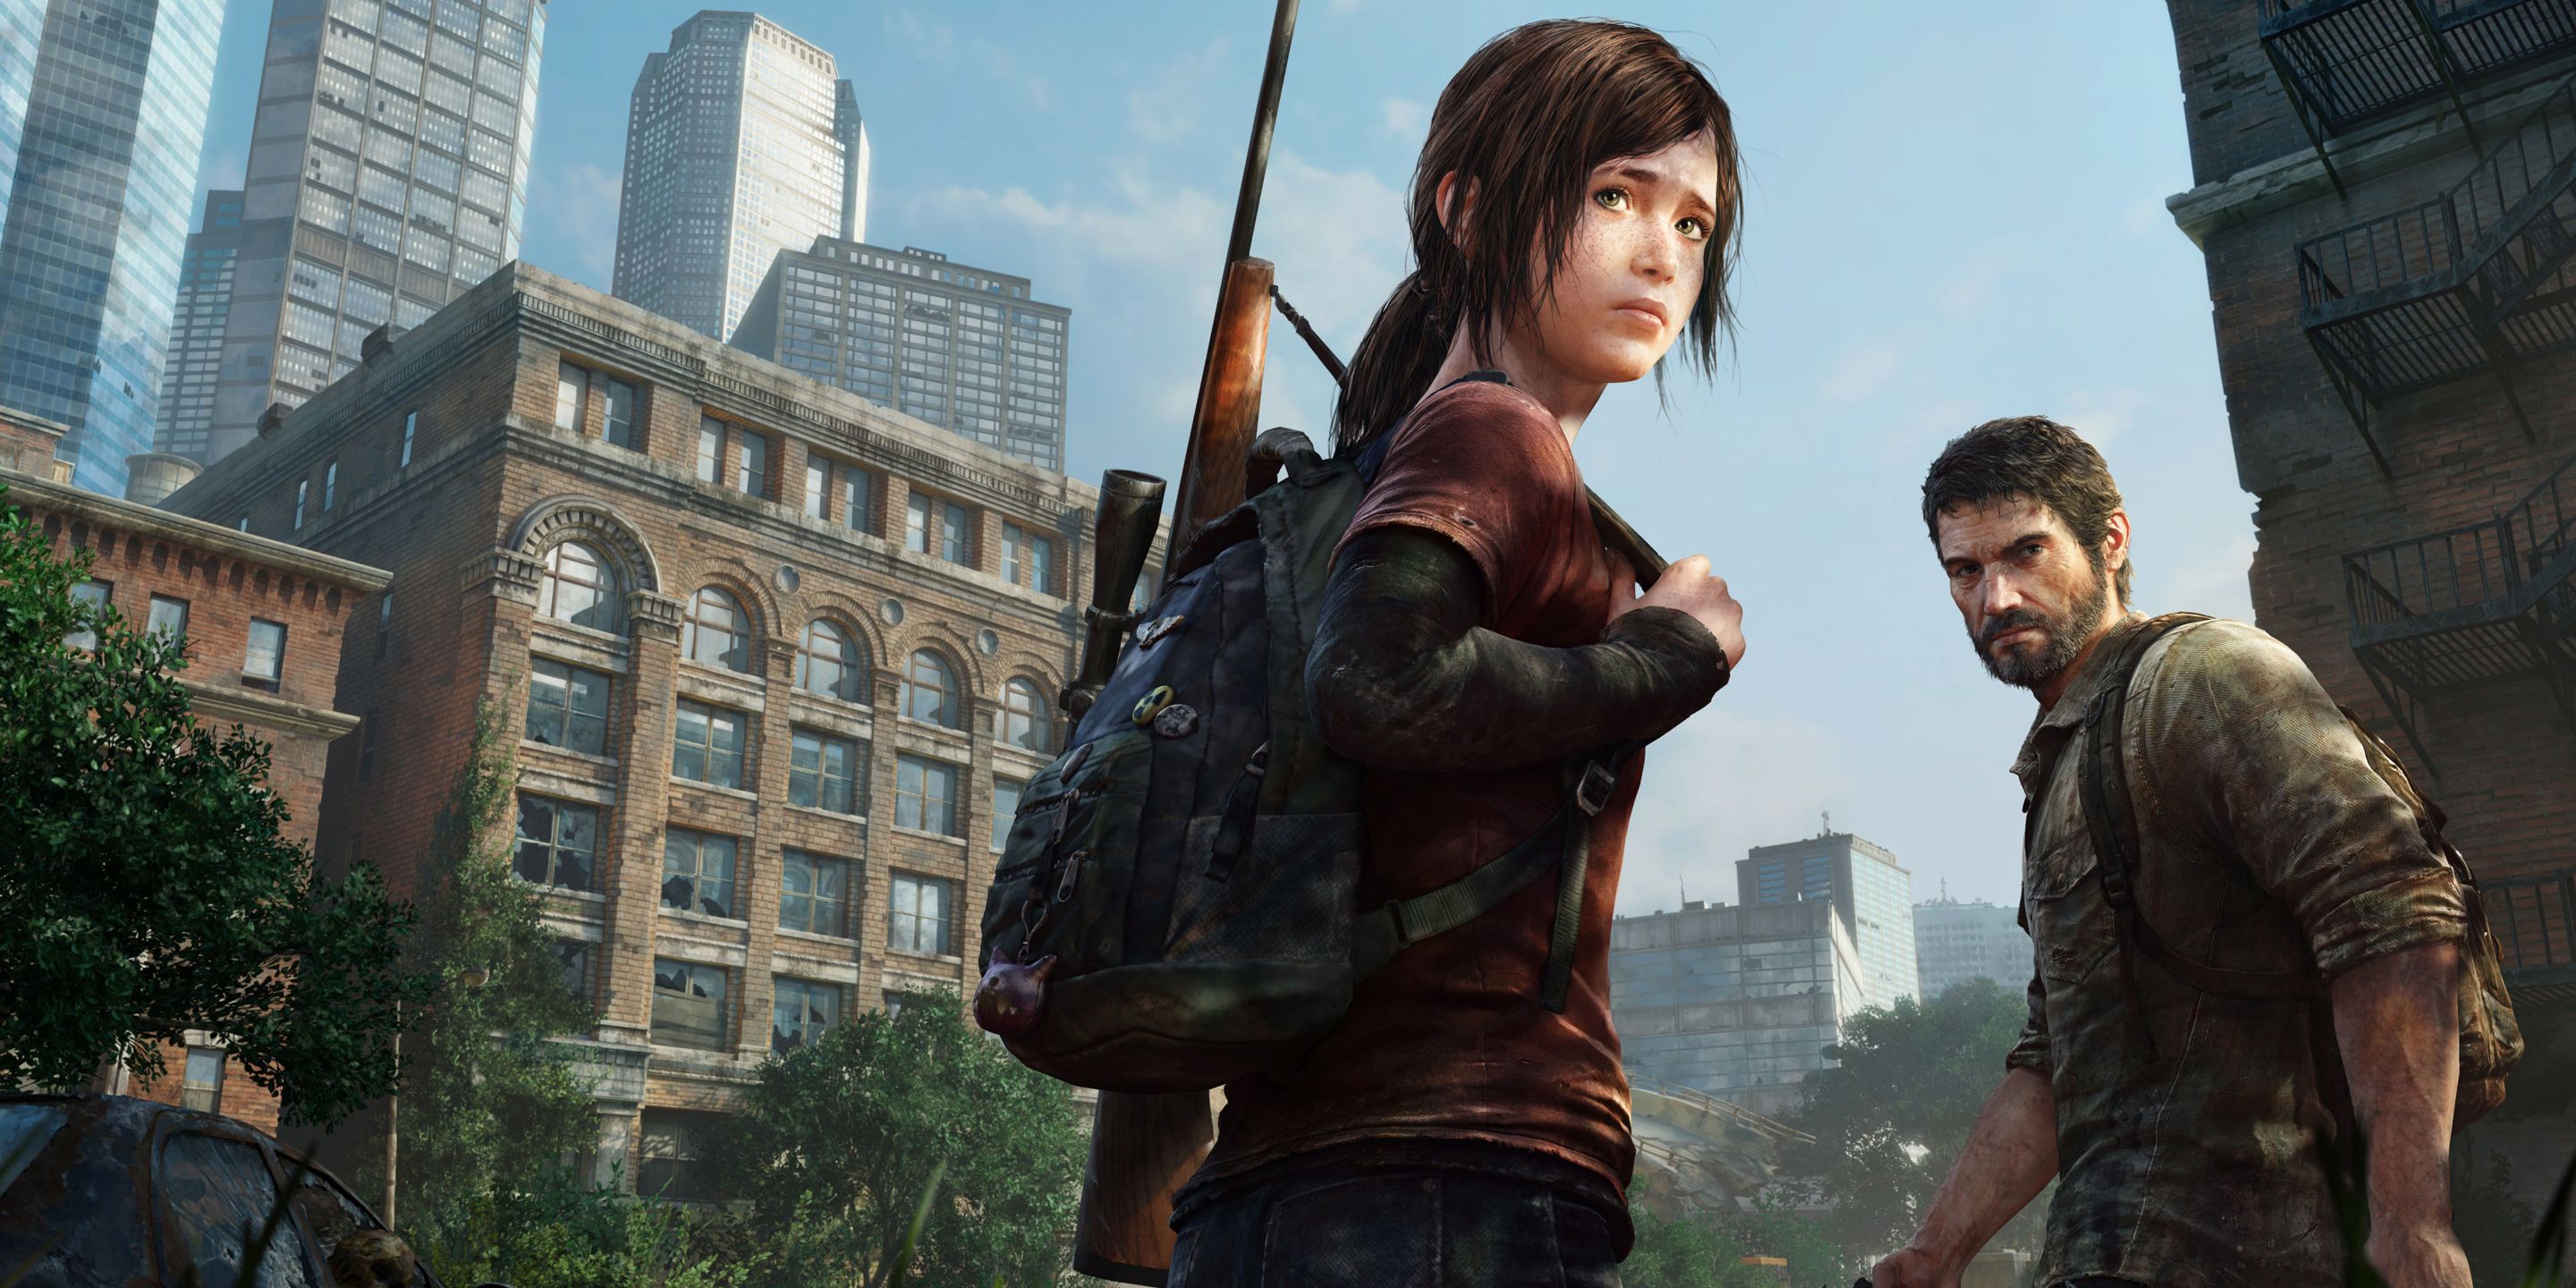 Last Of Us Remake: Every Major Game Released Between TLOU 1 & 2